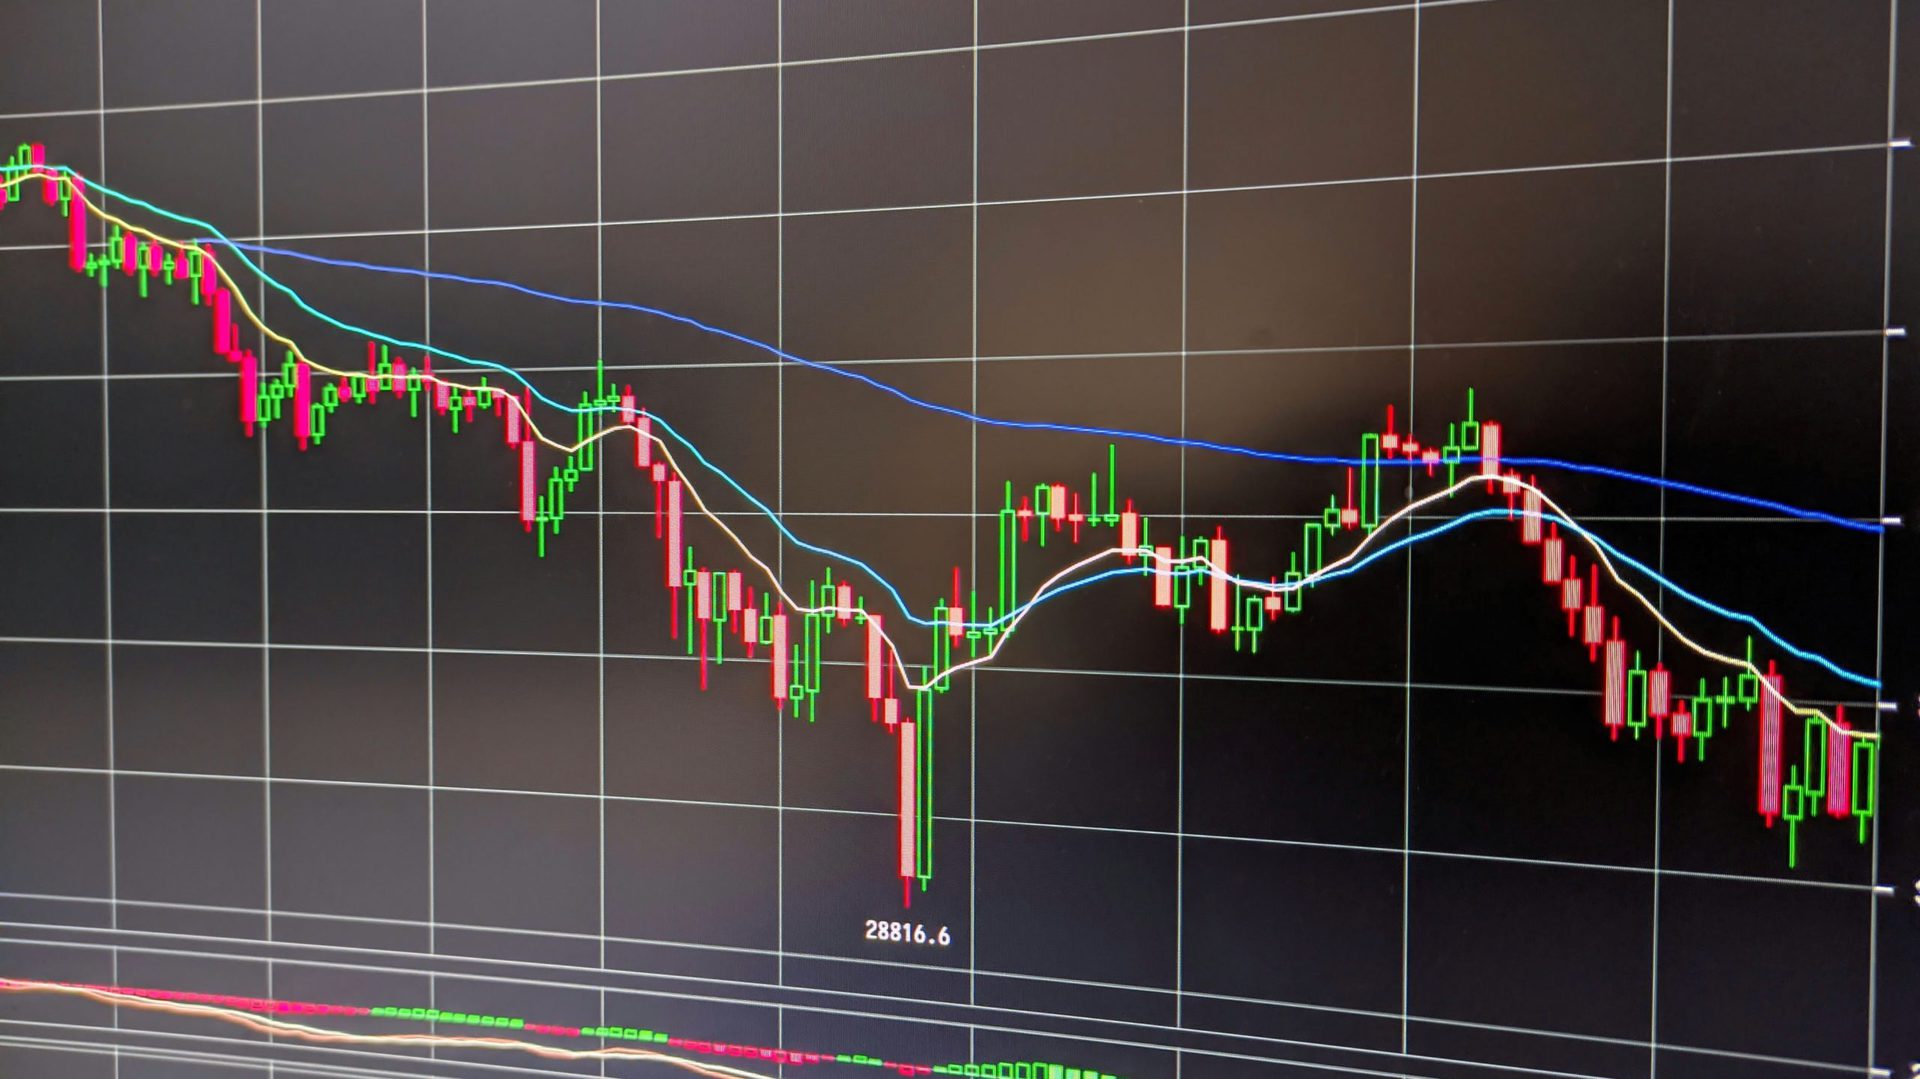 Bitcoin's price chart with downward trend